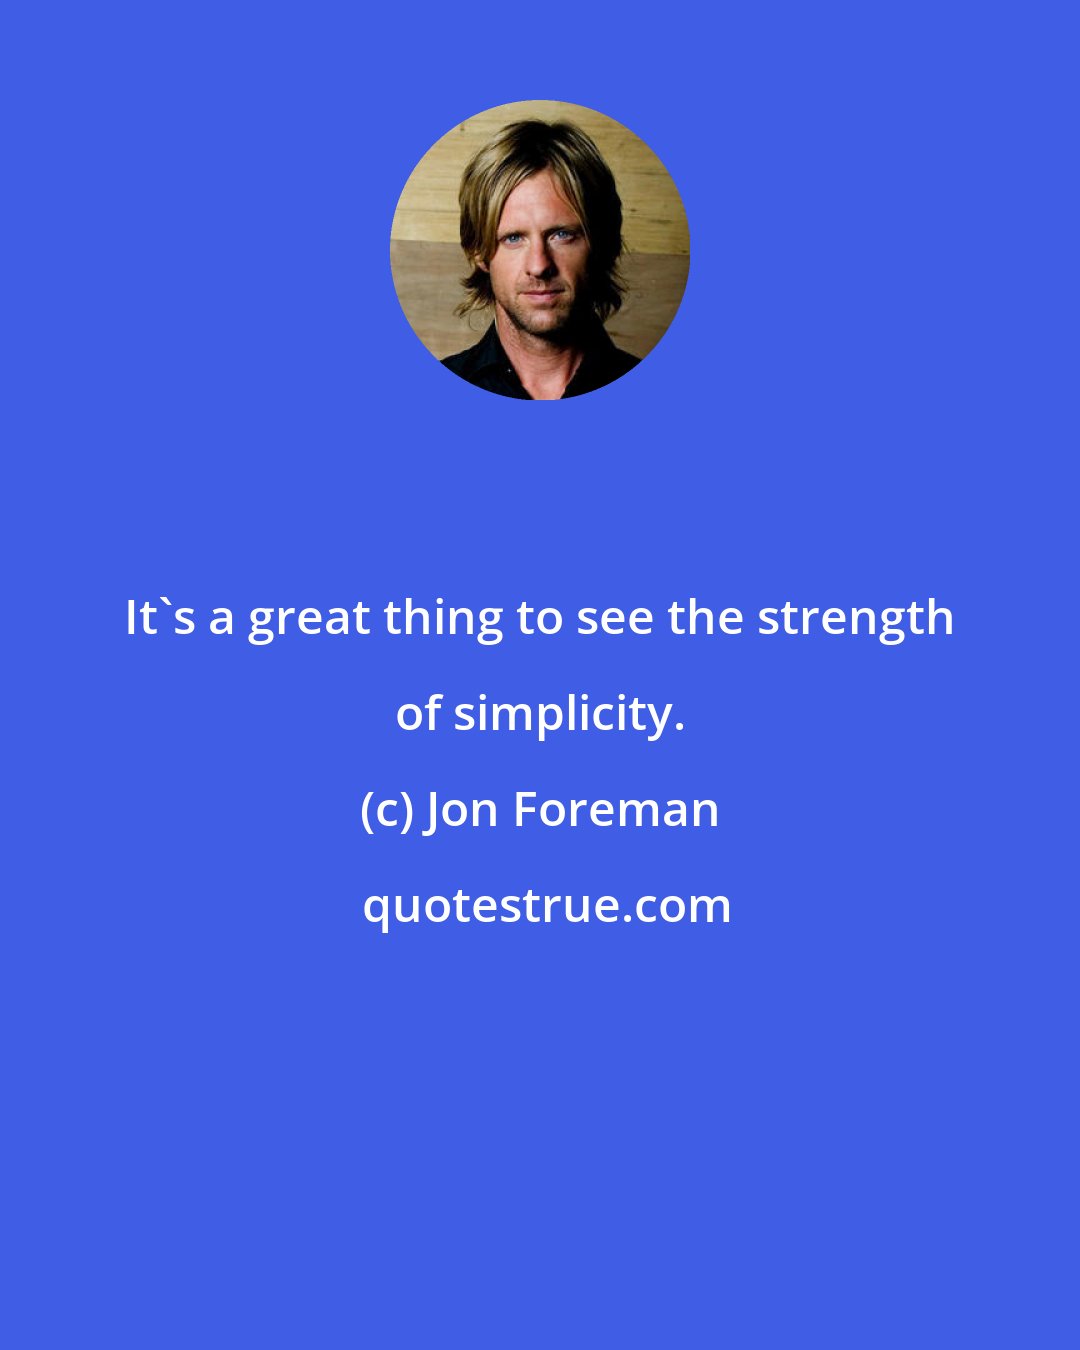 Jon Foreman: It's a great thing to see the strength of simplicity.